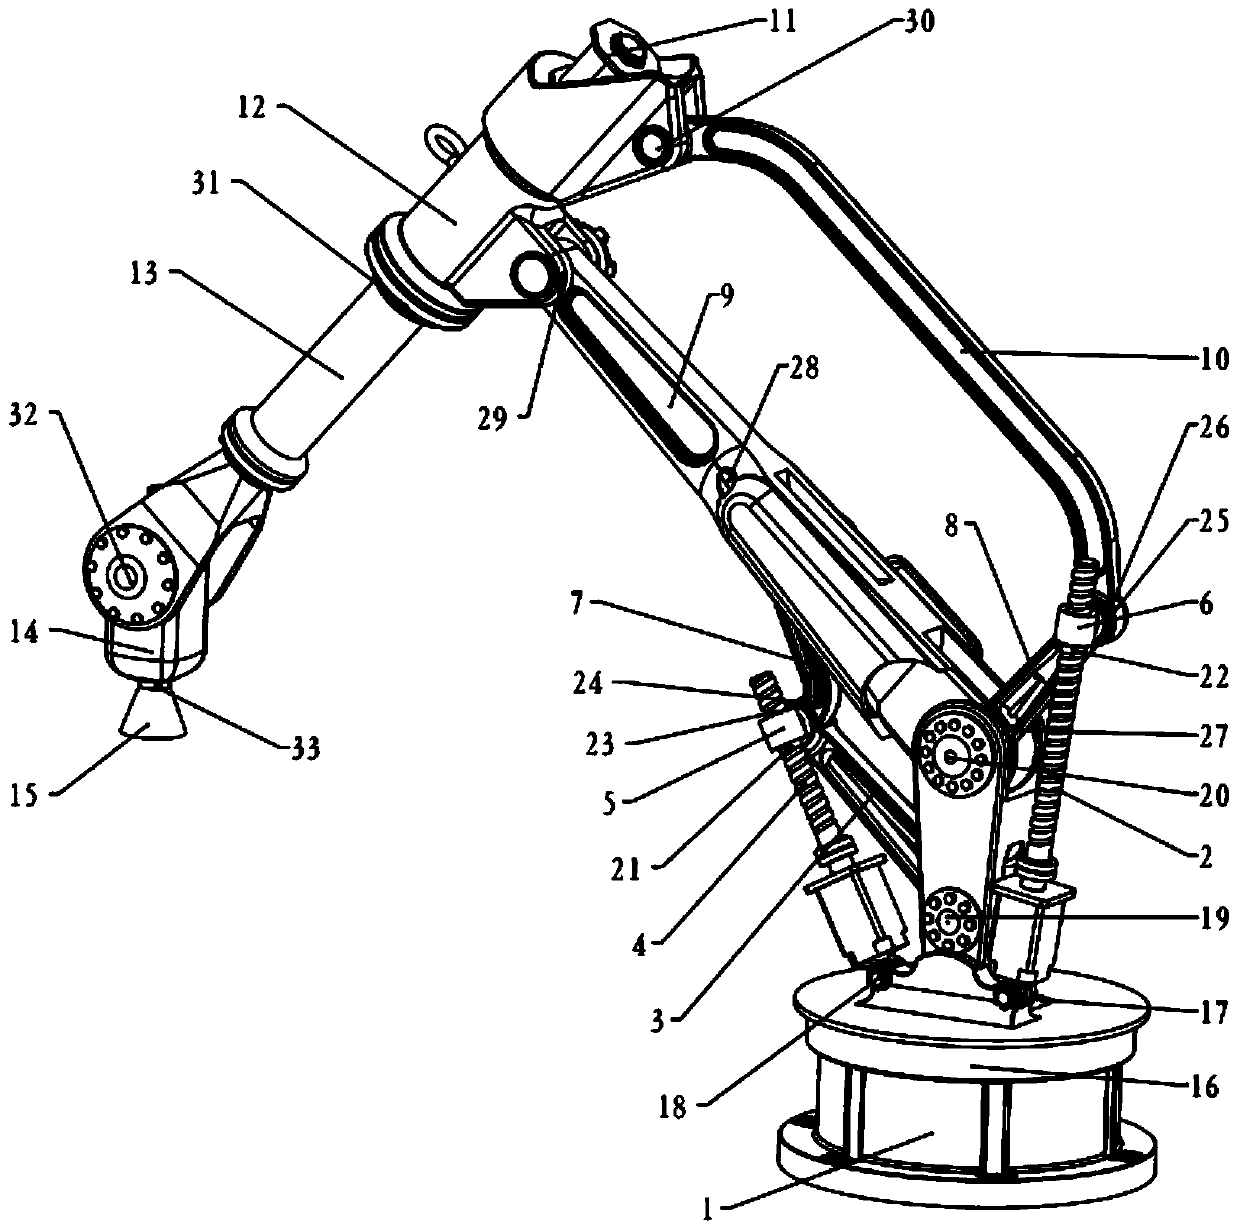 Six-freedom-degree industrial robot with ball screw pair transmission